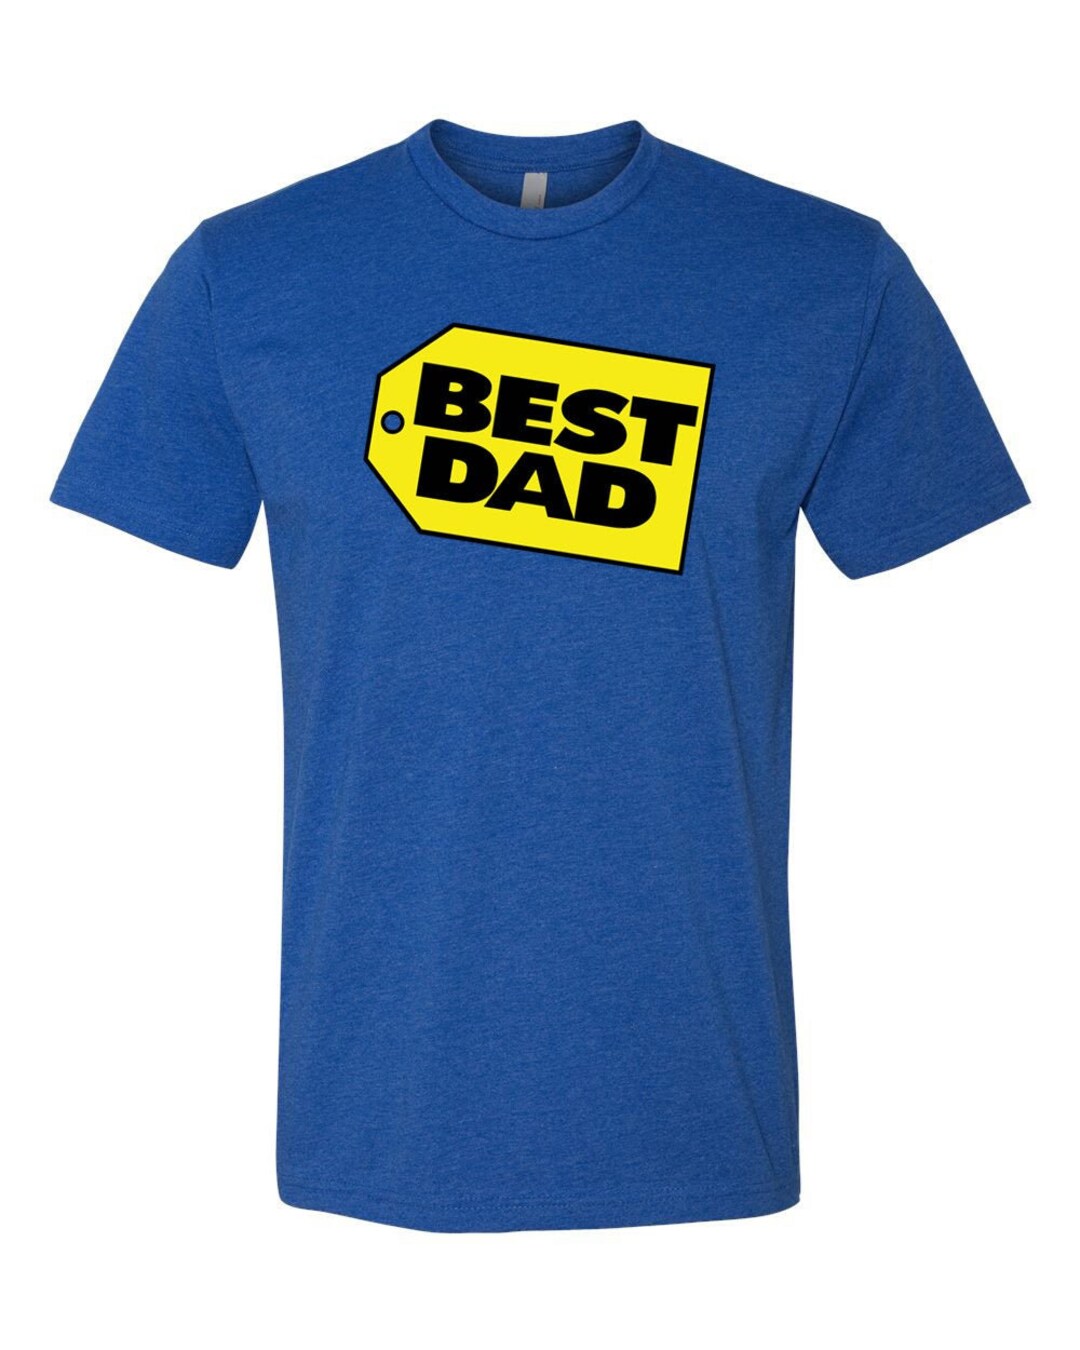 Best Dad Shirt Best Dad T-shirt Cotton & Polyester Fabric - Etsy